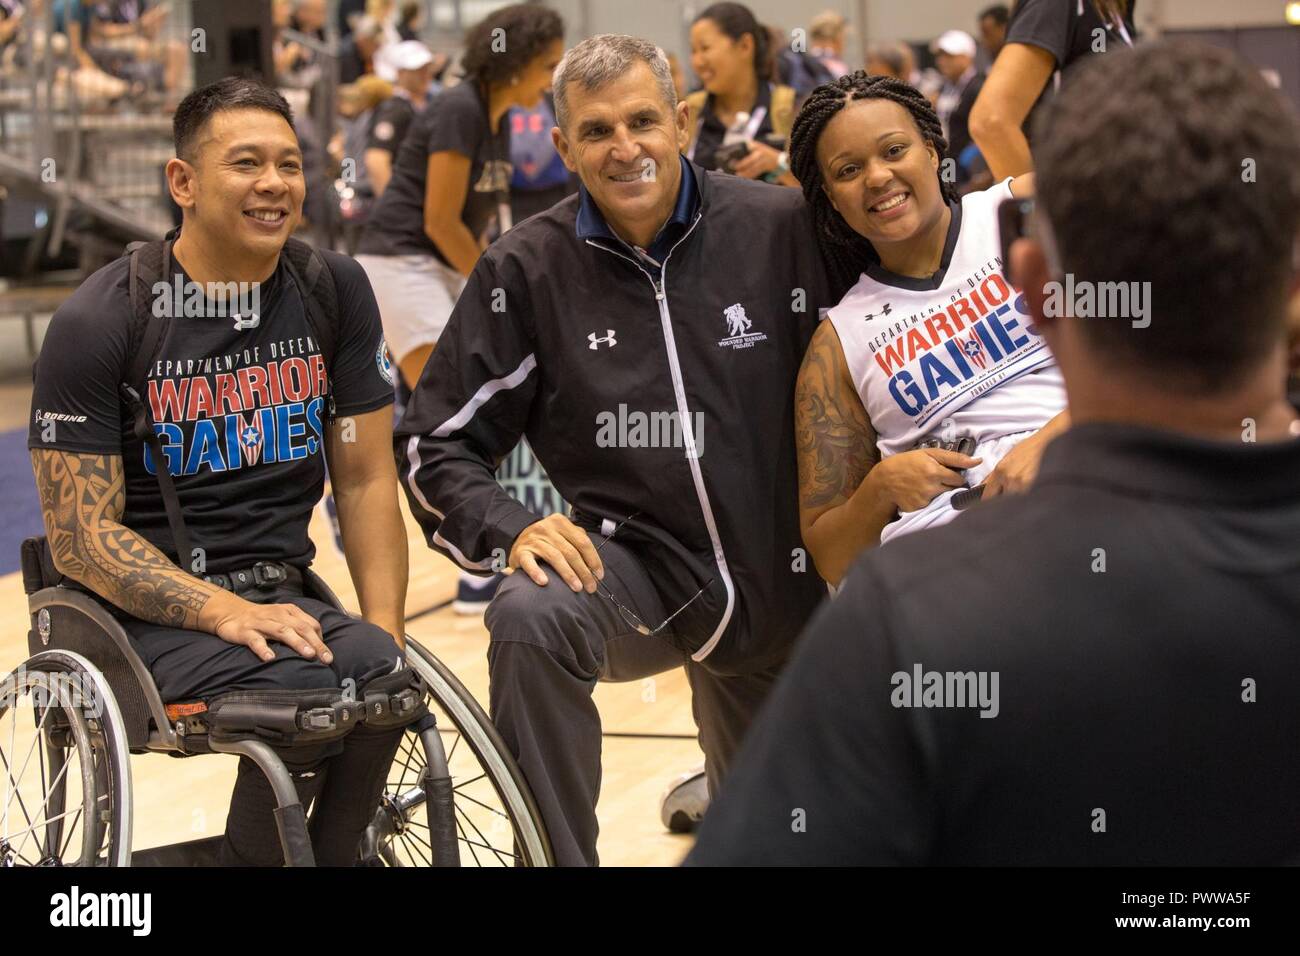 U.S. Army veteran Jhoonar Barrera, Chief executive officer Mike Linnington  of Wounded Warrior Project and U.S. Army Spc. Stephanie Morris, posses for  a photo after the wheelchair basketball competition for the 2017